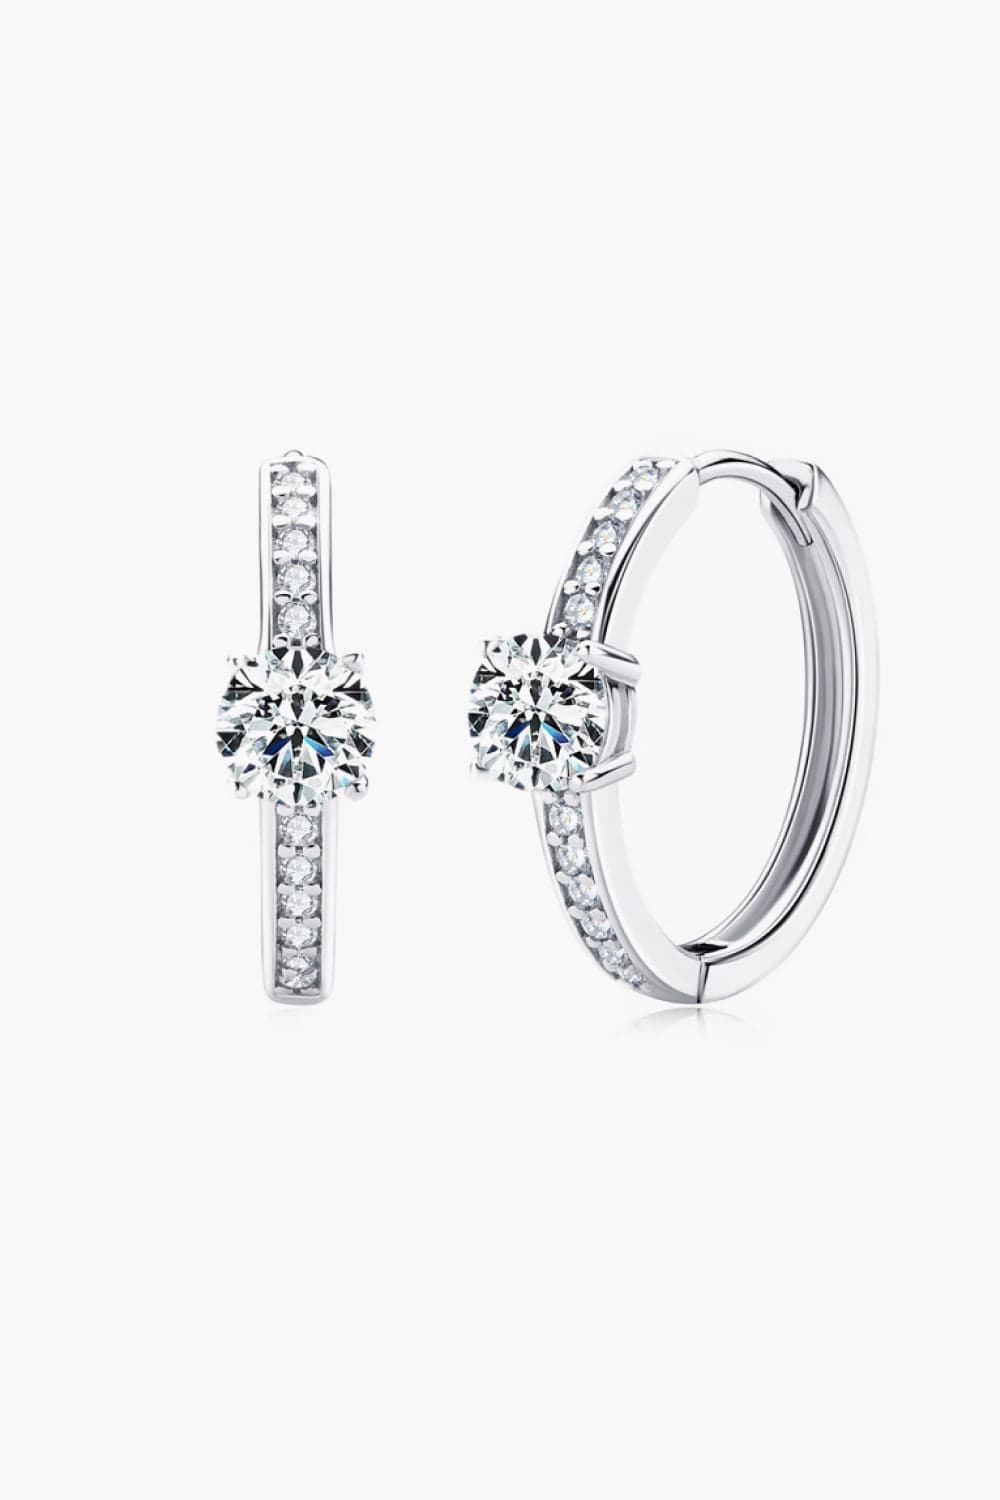 Carry Your Love 1 Carat Moissanite Platinum-Plated Earrings - Body By J'ne